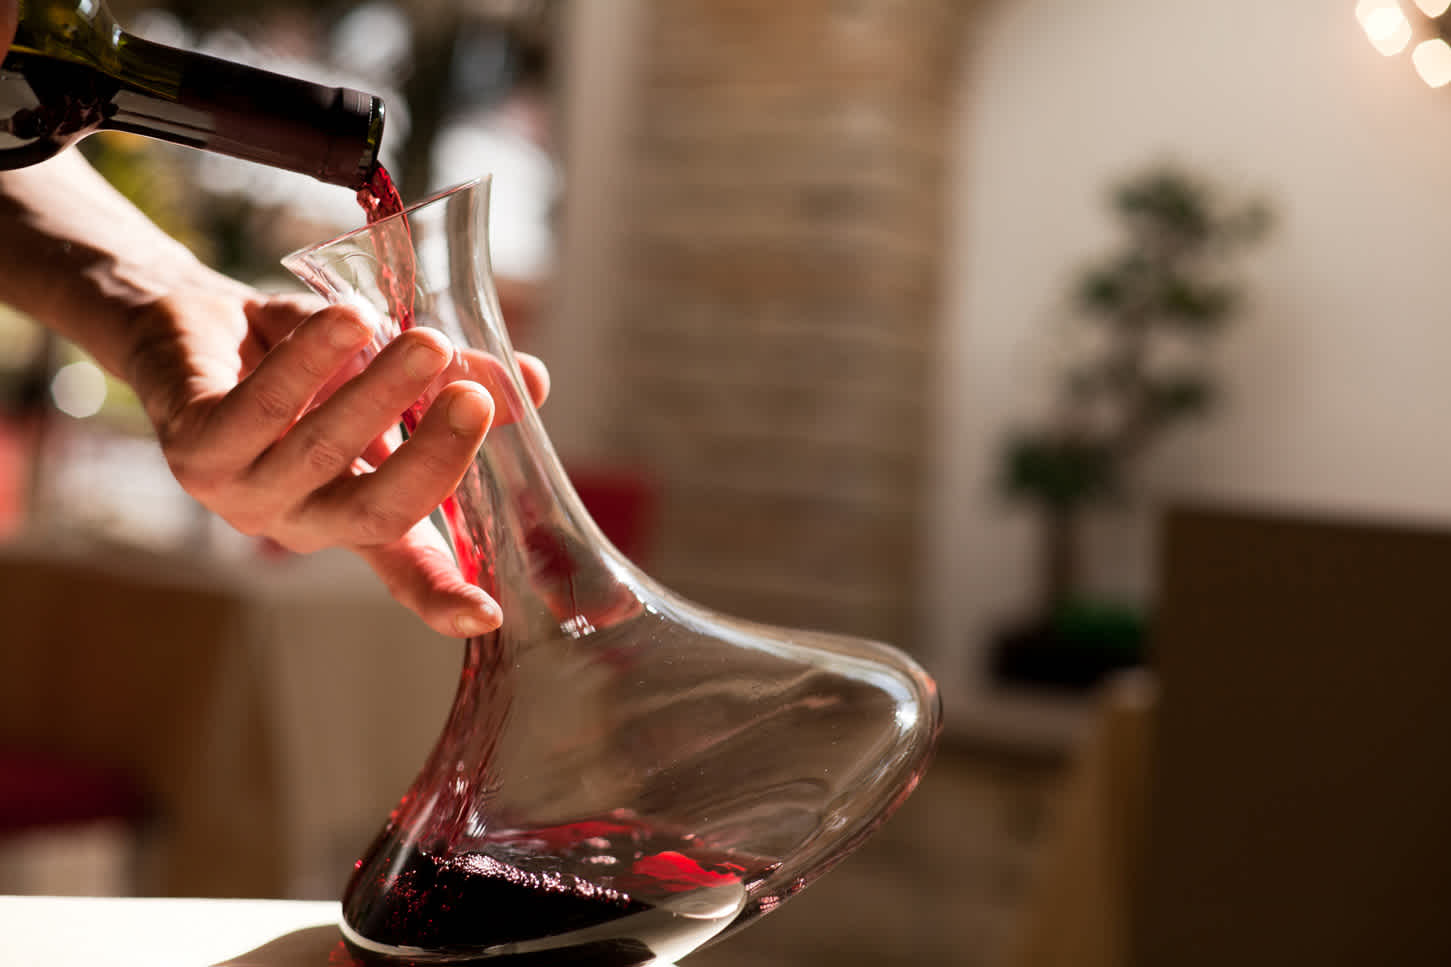 Using a wine decanter